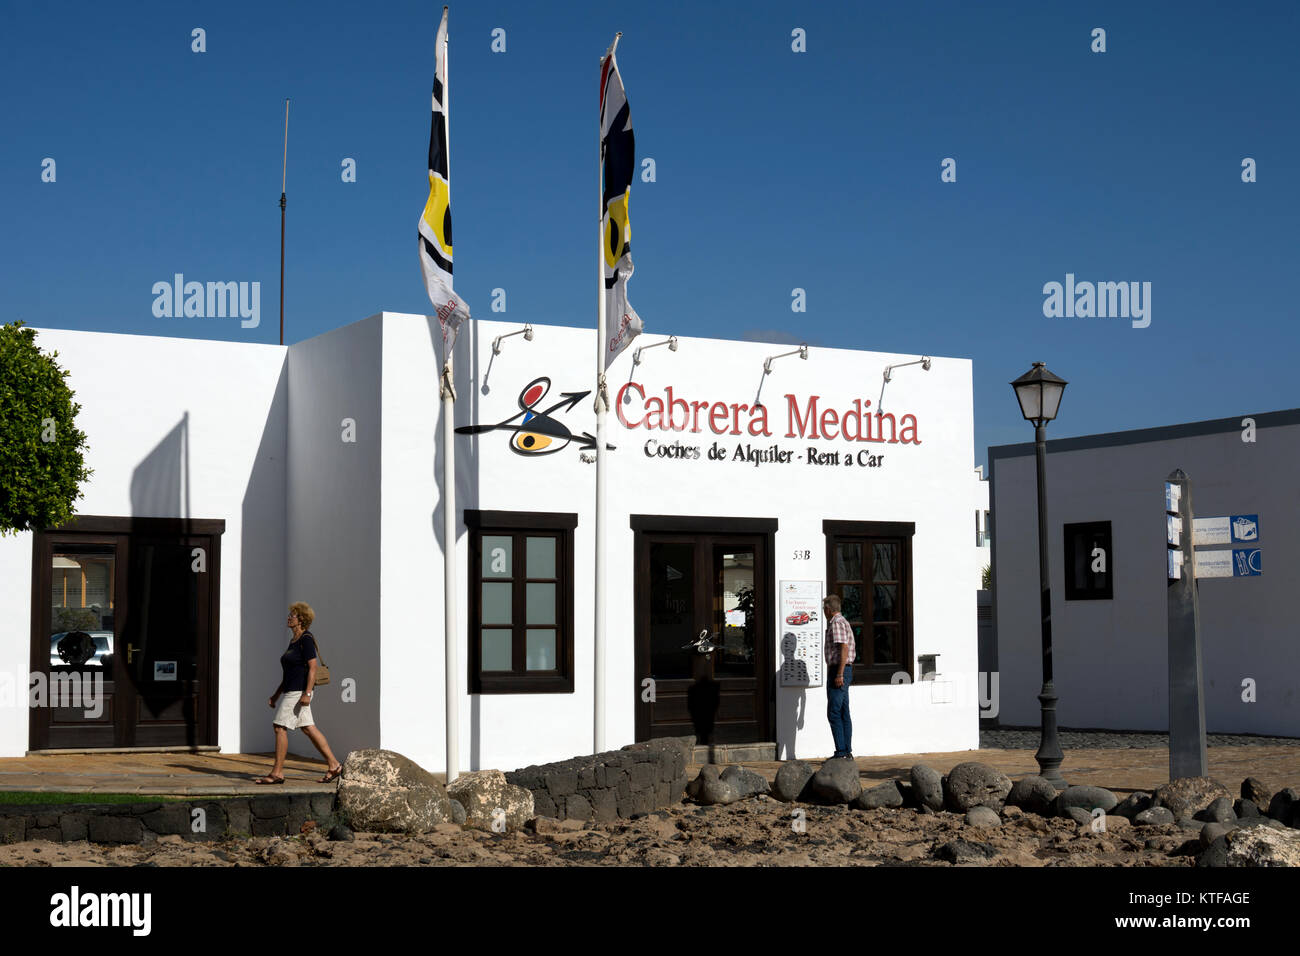 Car hire office, Lanzarote, Canary Islands, Spain. Stock Photo